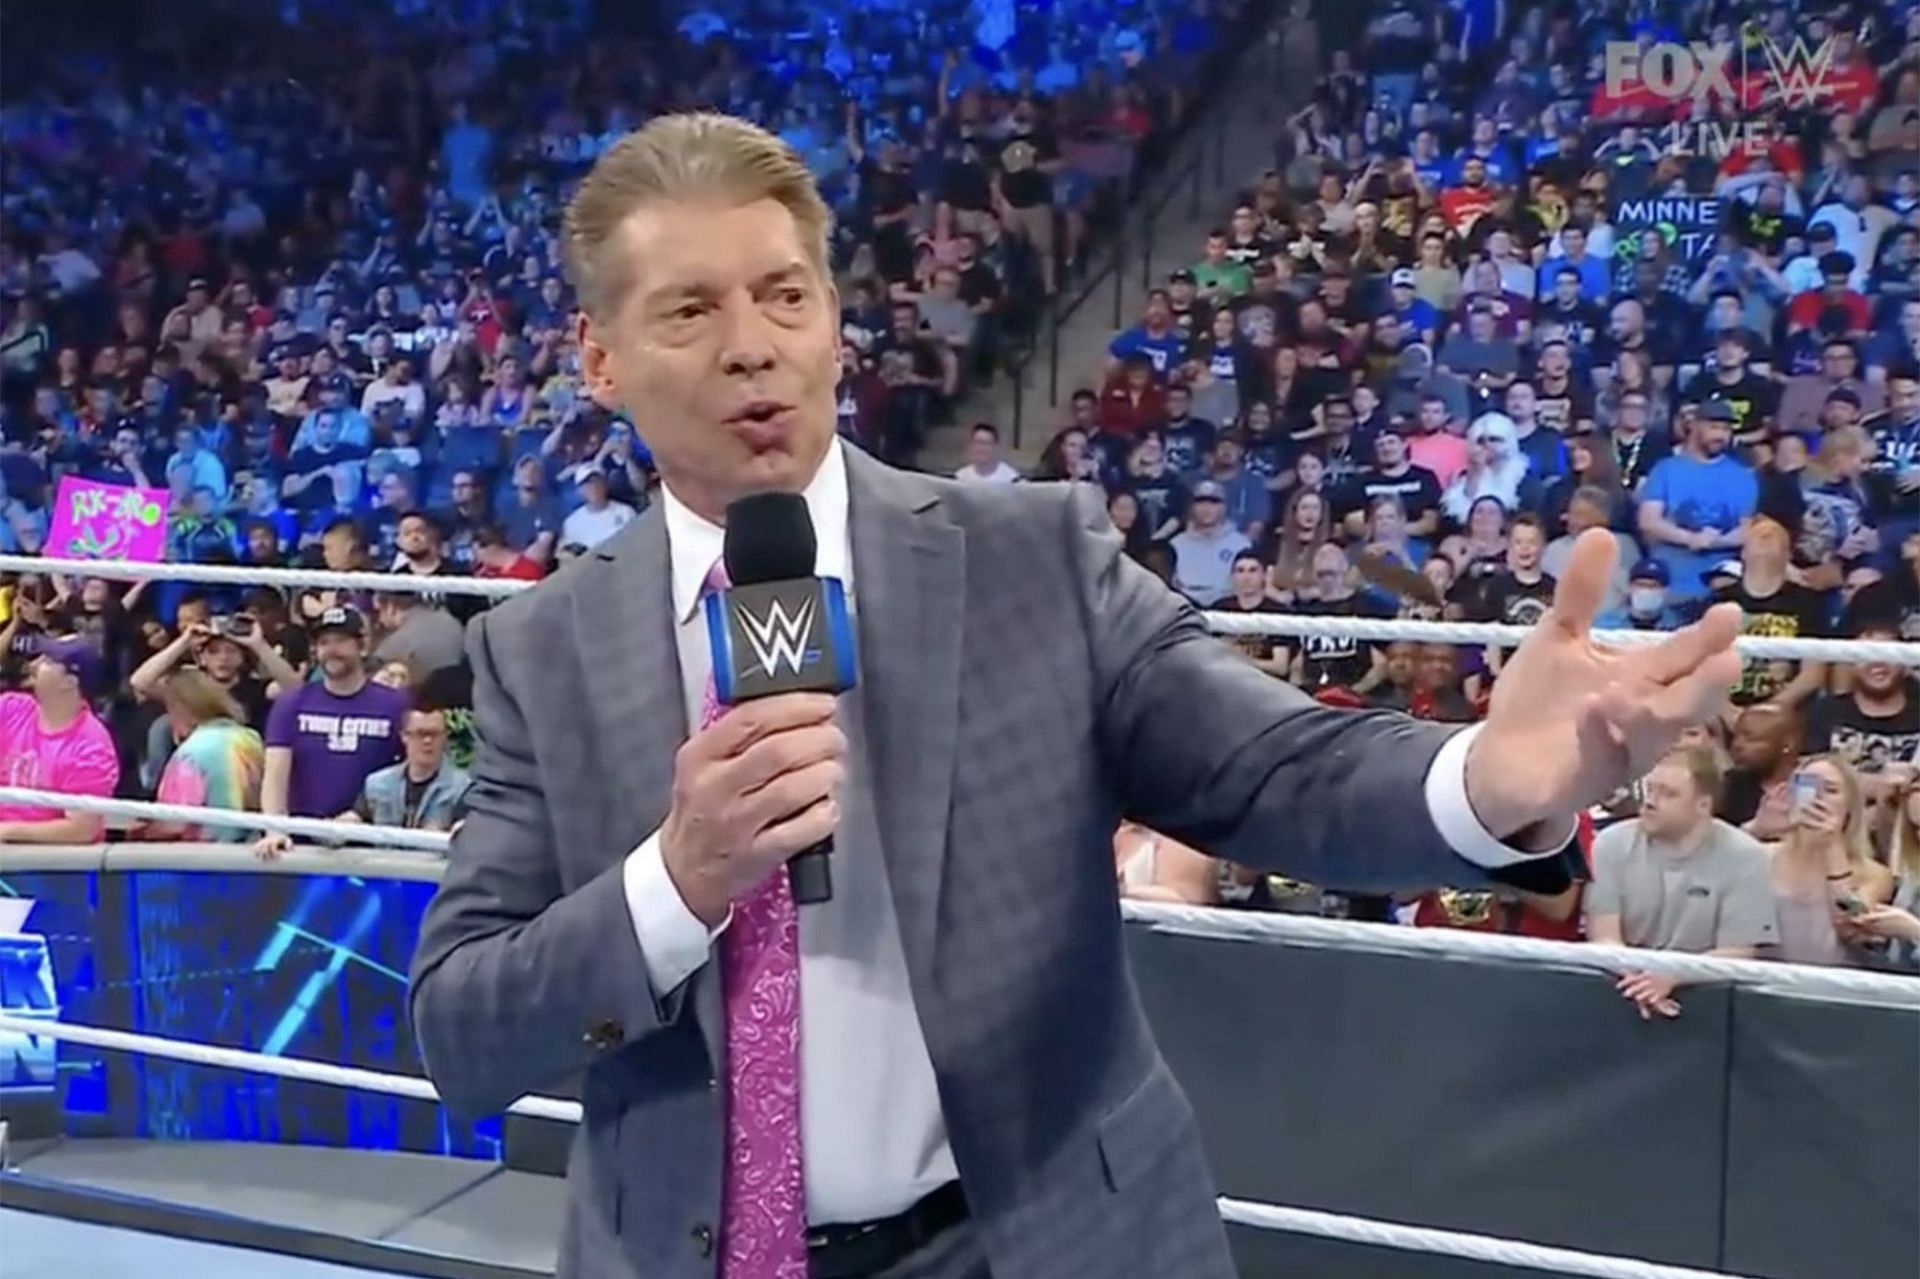 Vince McMahon has stepped back from his role as WWE Chairman and CEO